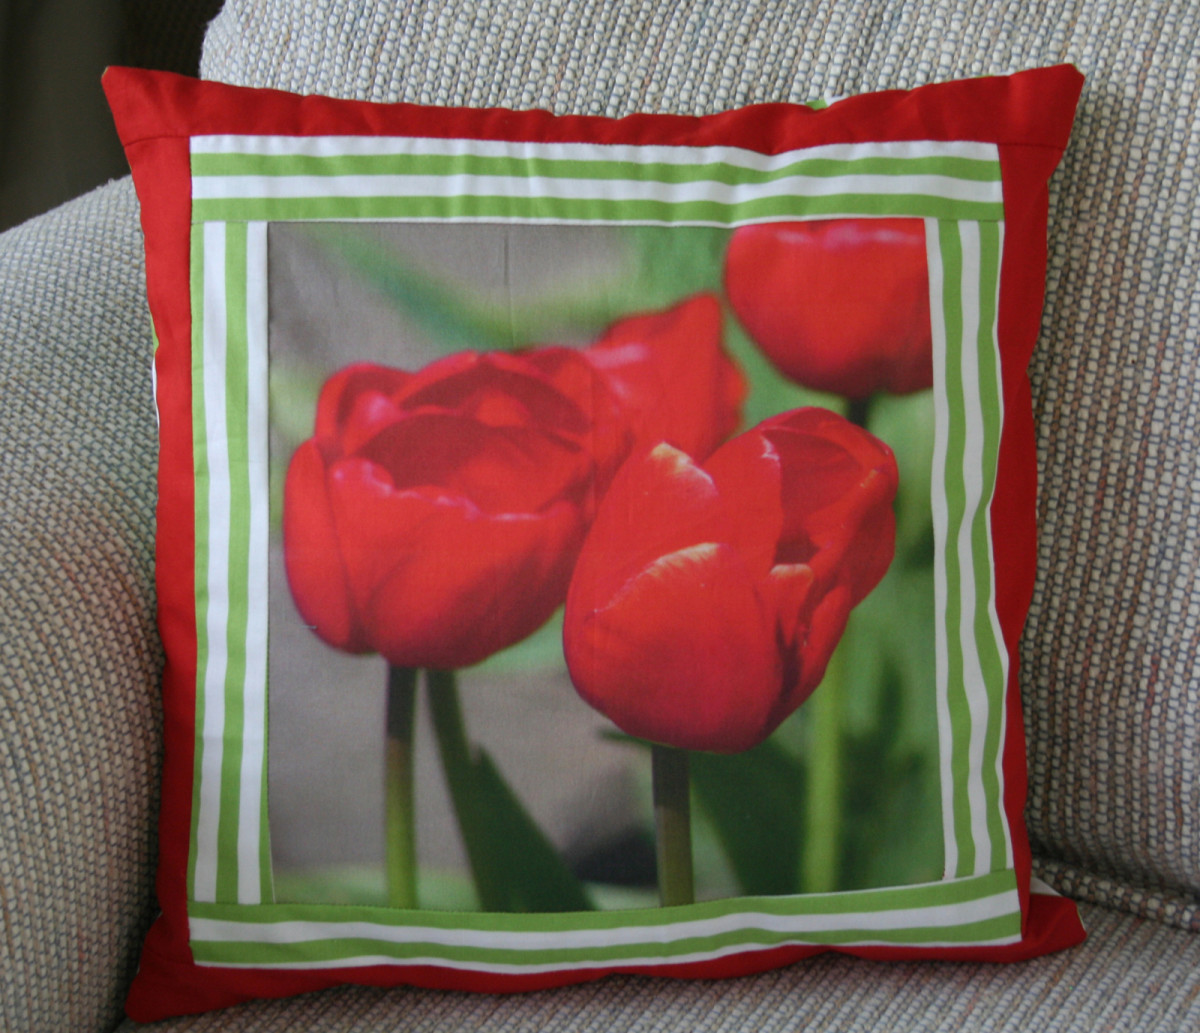 My beautiful red tulips on throw pillow.